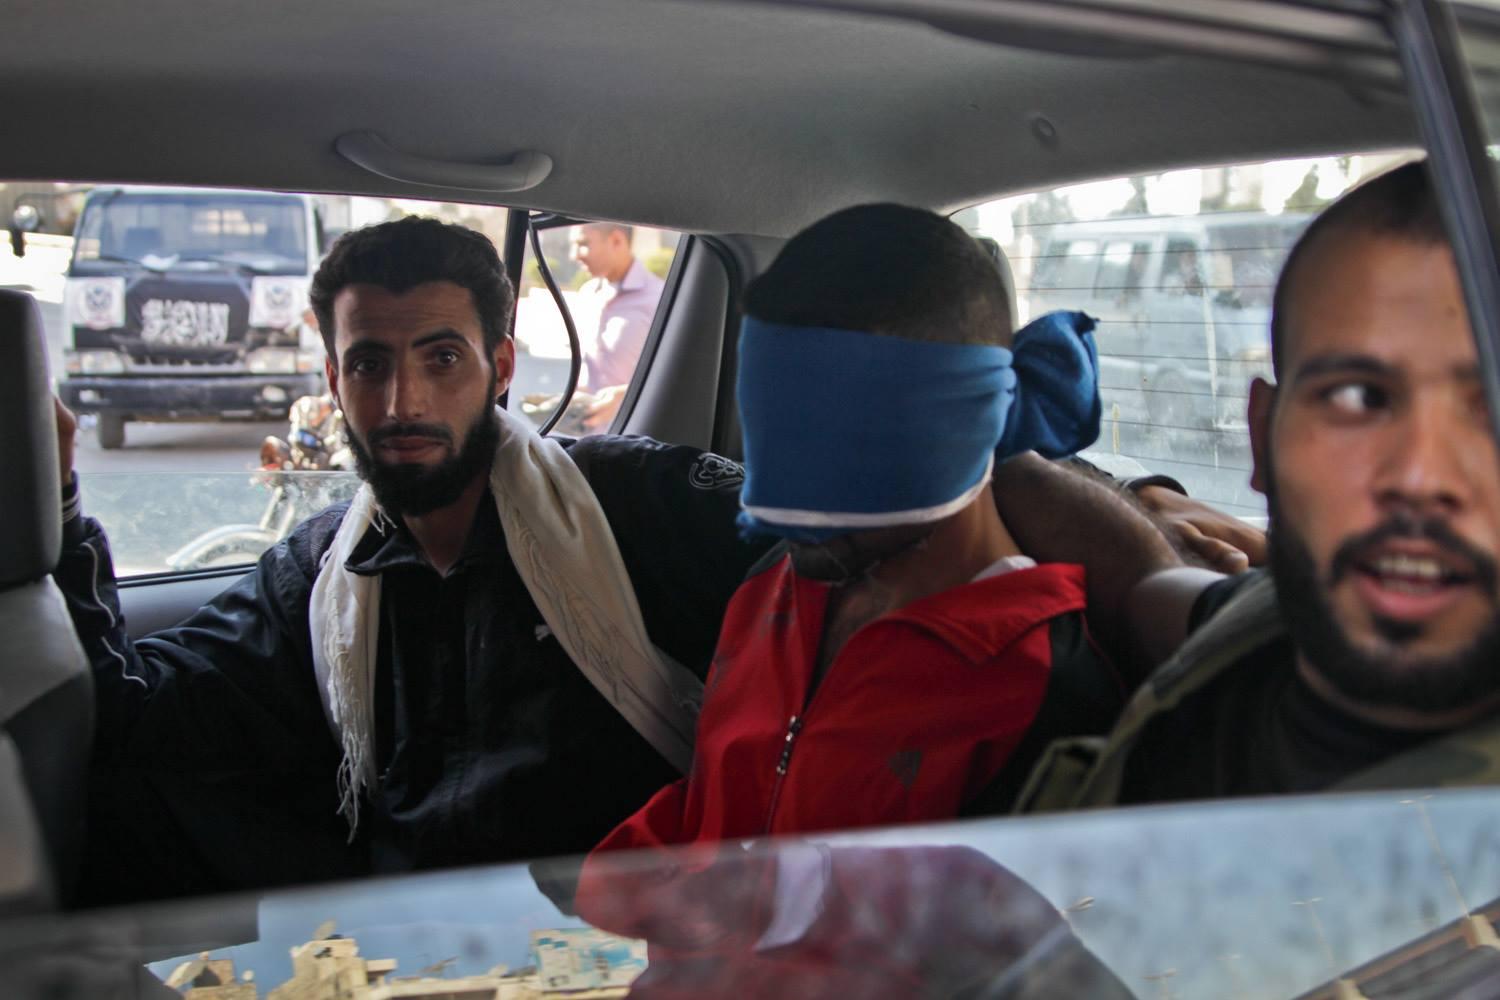 Near the Free Syrian Army makeshift headquarters, FSA fighters drive through a neighborhood in Aleppo with a member of what they believe to be part of the Shabiha on August 21, 2012. Rebels surrounded the car chanting &quot;allahu akbar&quot; (meaning god is great). The man blindfolded was taken to an undisclosed location.